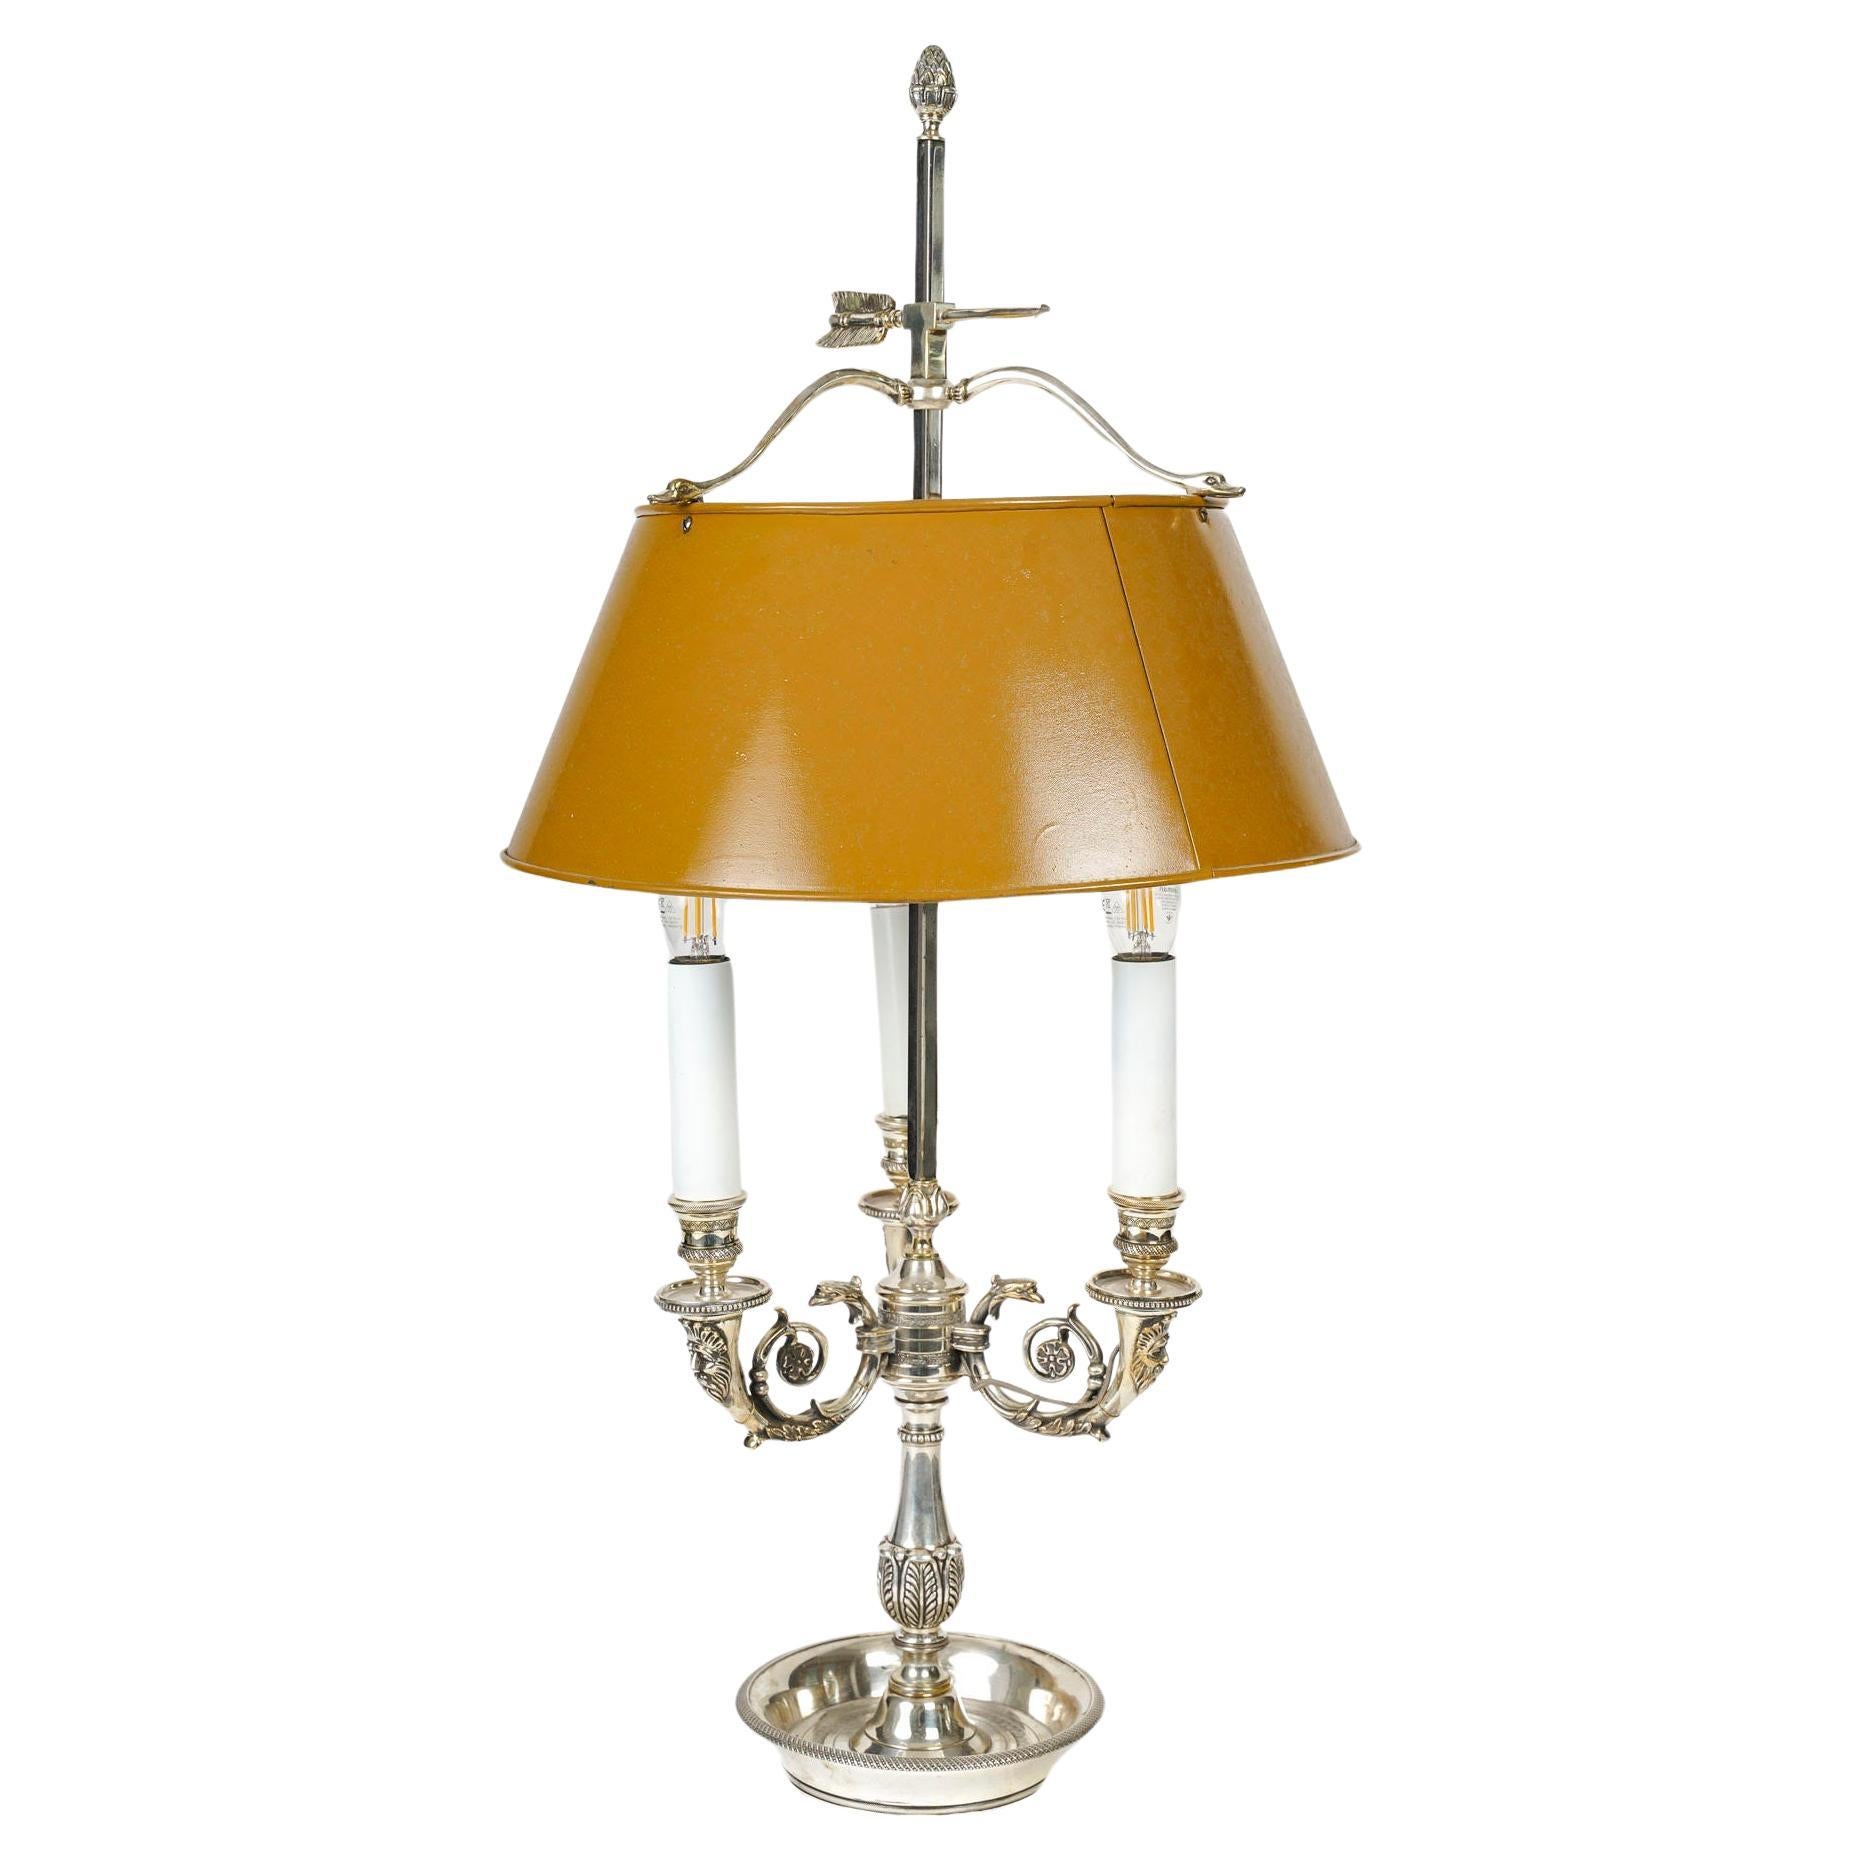 Large Bouillotte Lamp in Silver Plated Bronze, 19th Century, Napoleon III Period For Sale